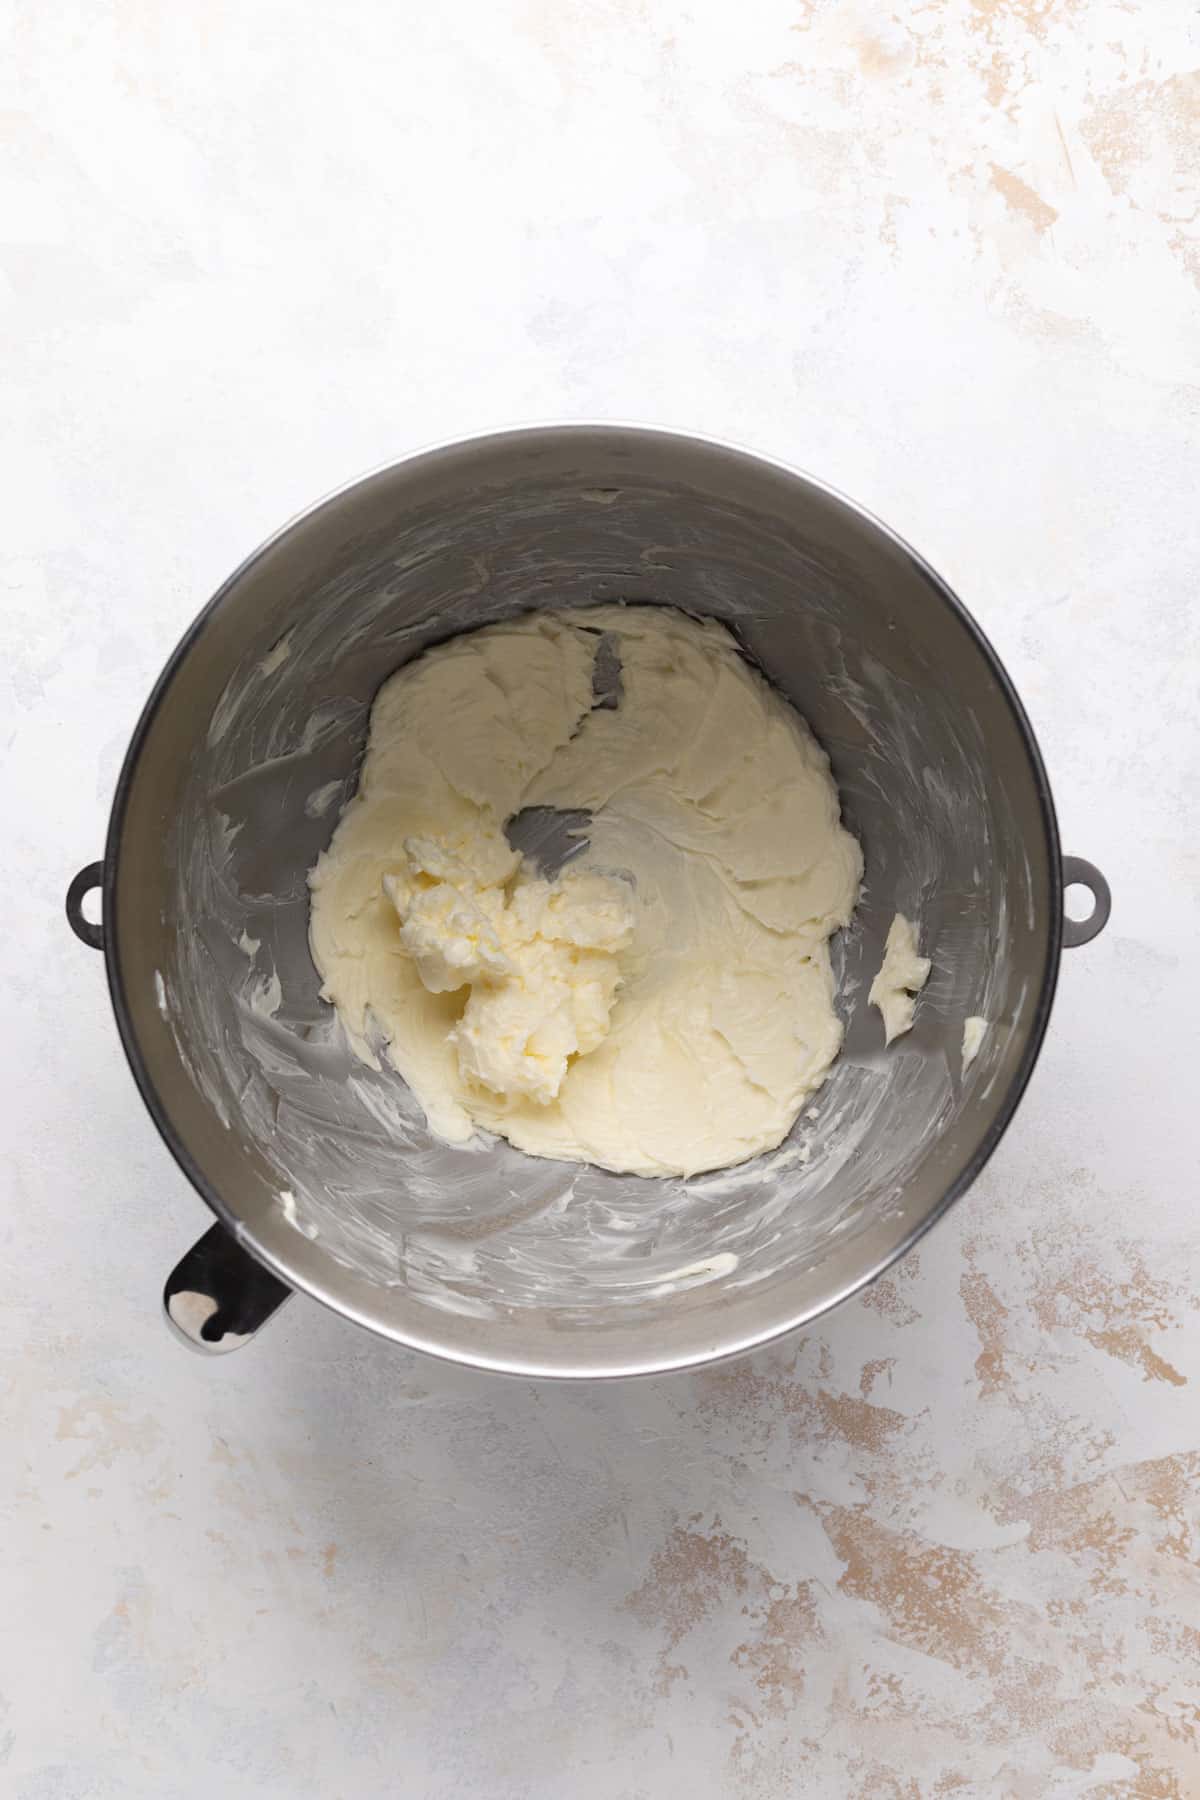 Creamed butter in a metal stand mixer bowl set on a flat surface.